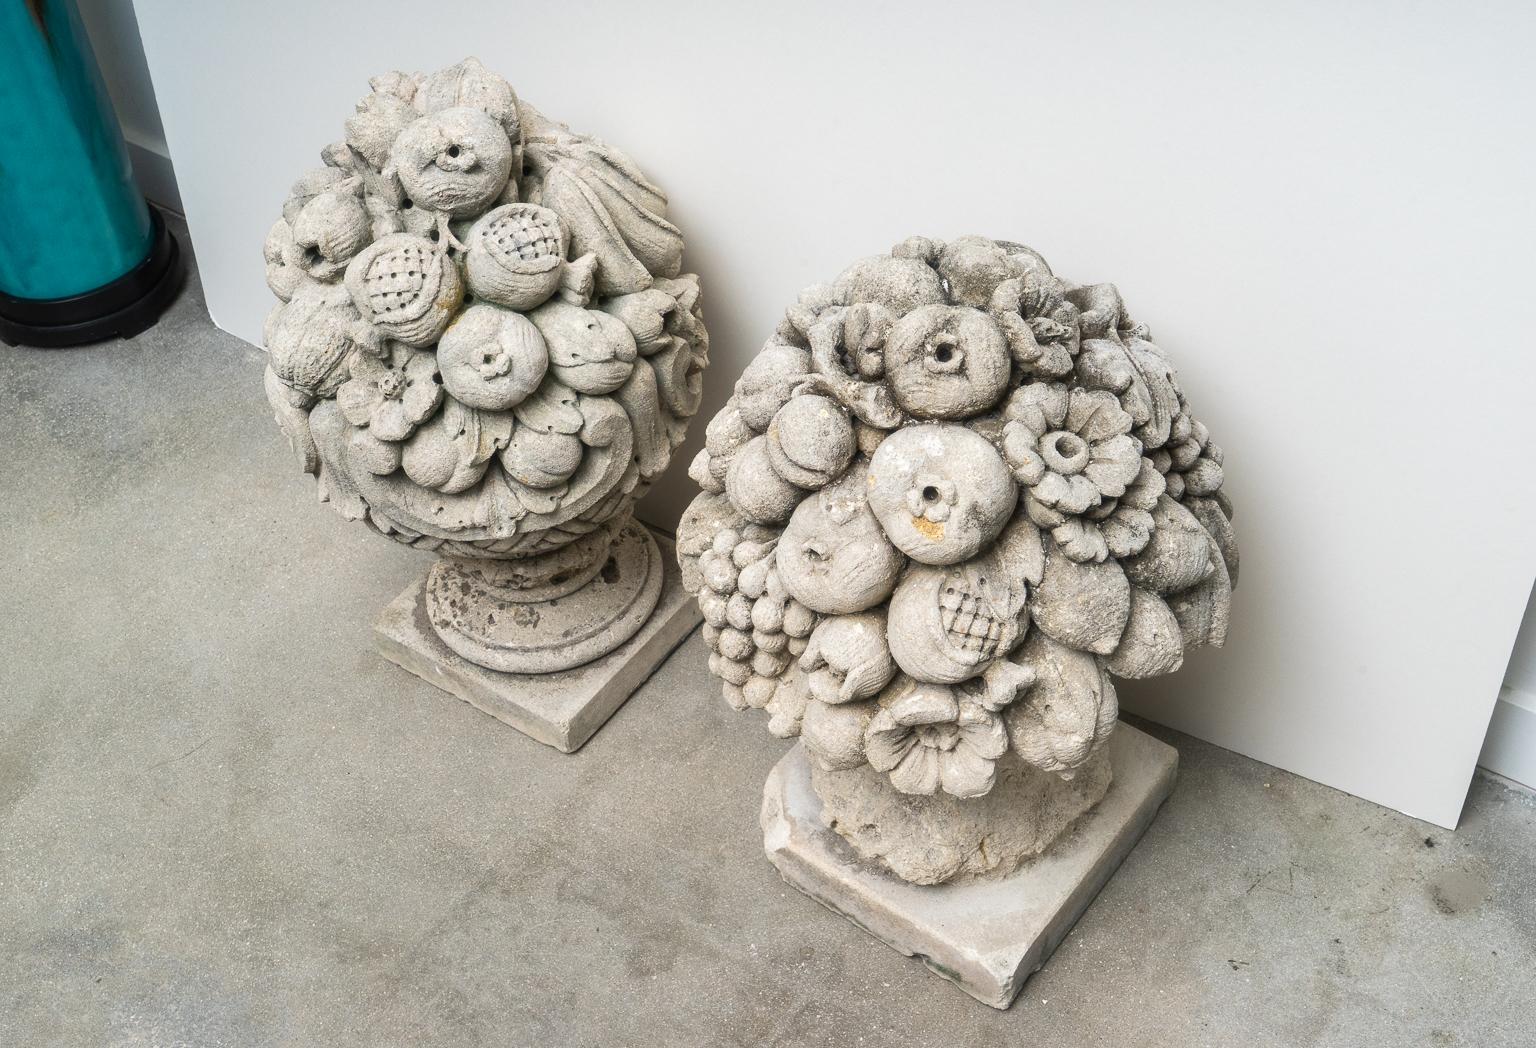 This stylish set of garden sculptures were acquired from a Palm Beach estate and they date to the early part of the 20th century. The pieces are a cast stone with various fruits and flowers.